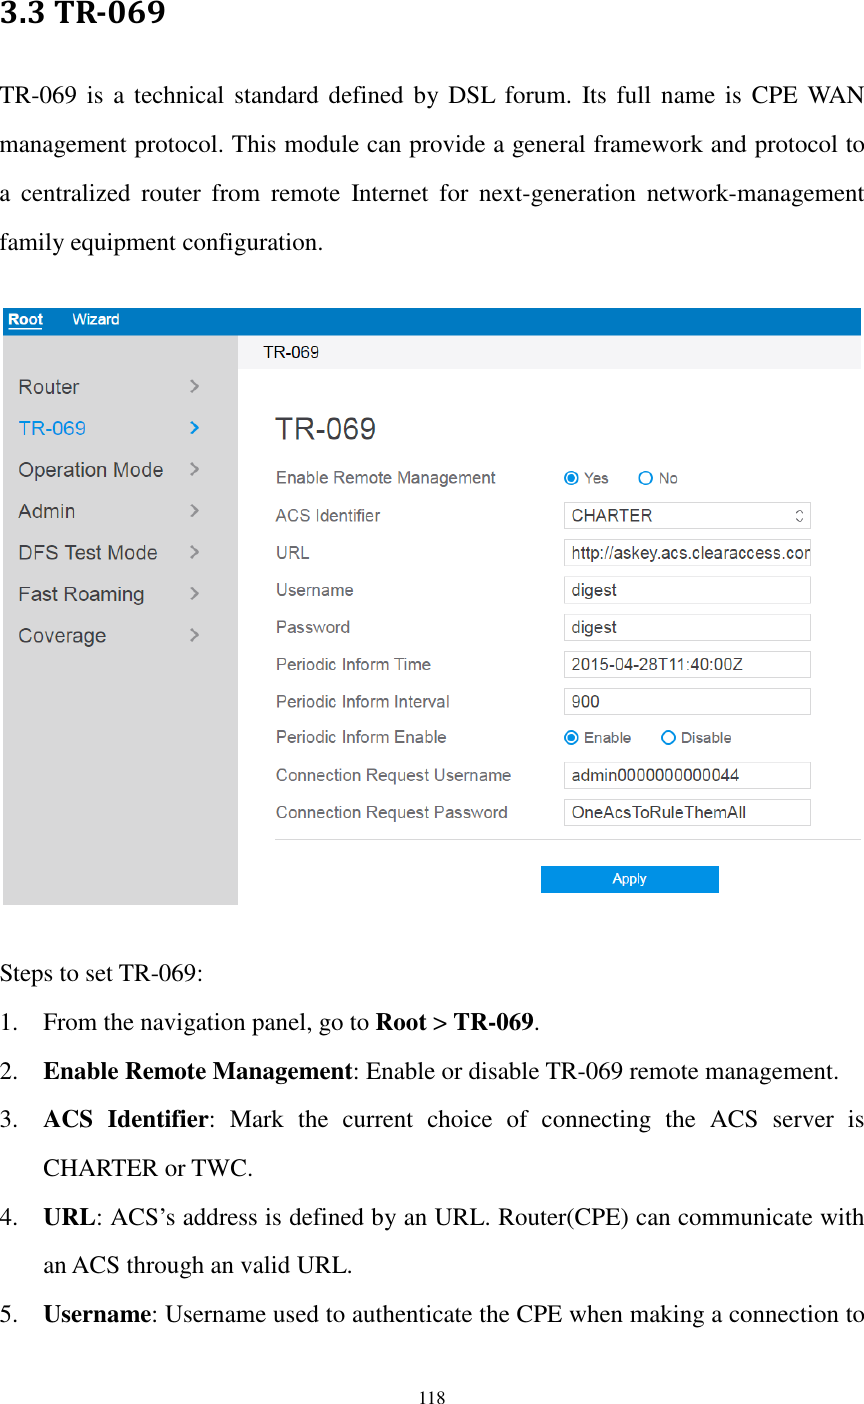  118  3.3 TR-069 TR-069 is a  technical  standard defined by DSL  forum.  Its full name is  CPE WAN management protocol. This module can provide a general framework and protocol to a  centralized  router  from  remote  Internet  for  next-generation  network-management family equipment configuration.    Steps to set TR-069: 1. From the navigation panel, go to Root &gt; TR-069. 2. Enable Remote Management: Enable or disable TR-069 remote management. 3. ACS  Identifier:  Mark  the  current  choice  of  connecting  the  ACS  server  is CHARTER or TWC. 4. URL: ACS’s address is defined by an URL. Router(CPE) can communicate with an ACS through an valid URL. 5. Username: Username used to authenticate the CPE when making a connection to 